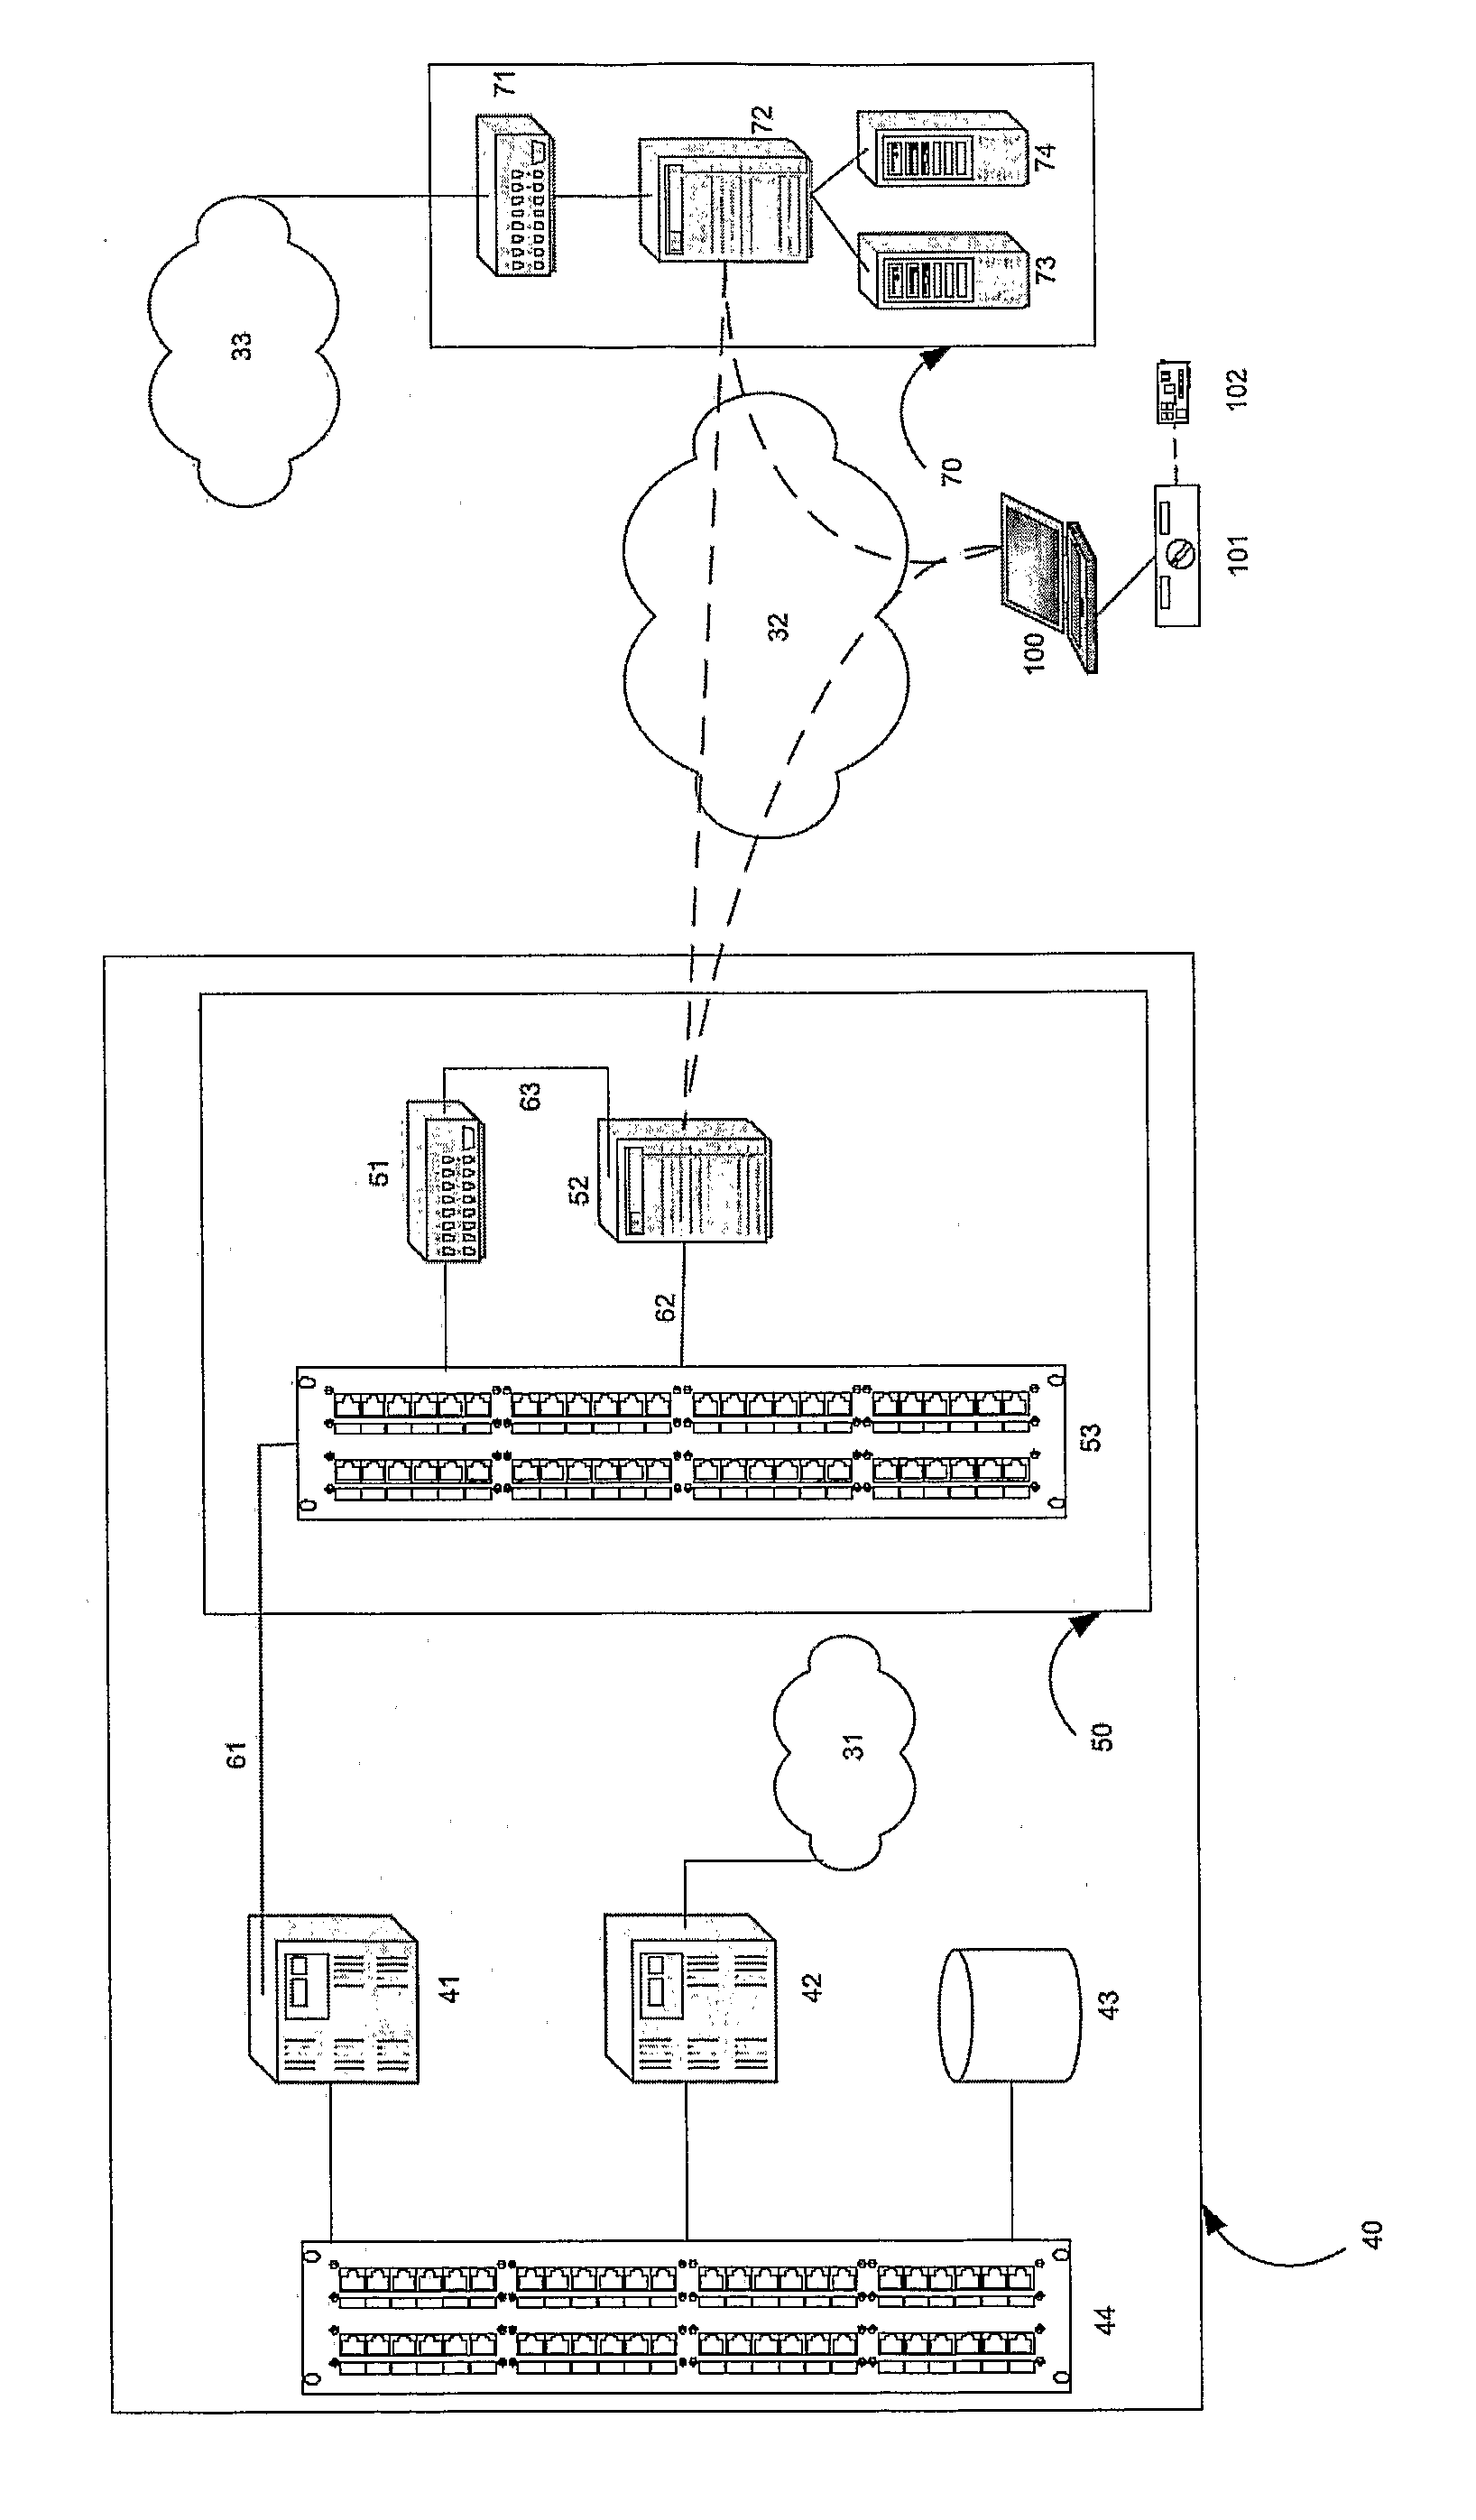 Method and system to enable mobile roaming over ip networks and local number portability